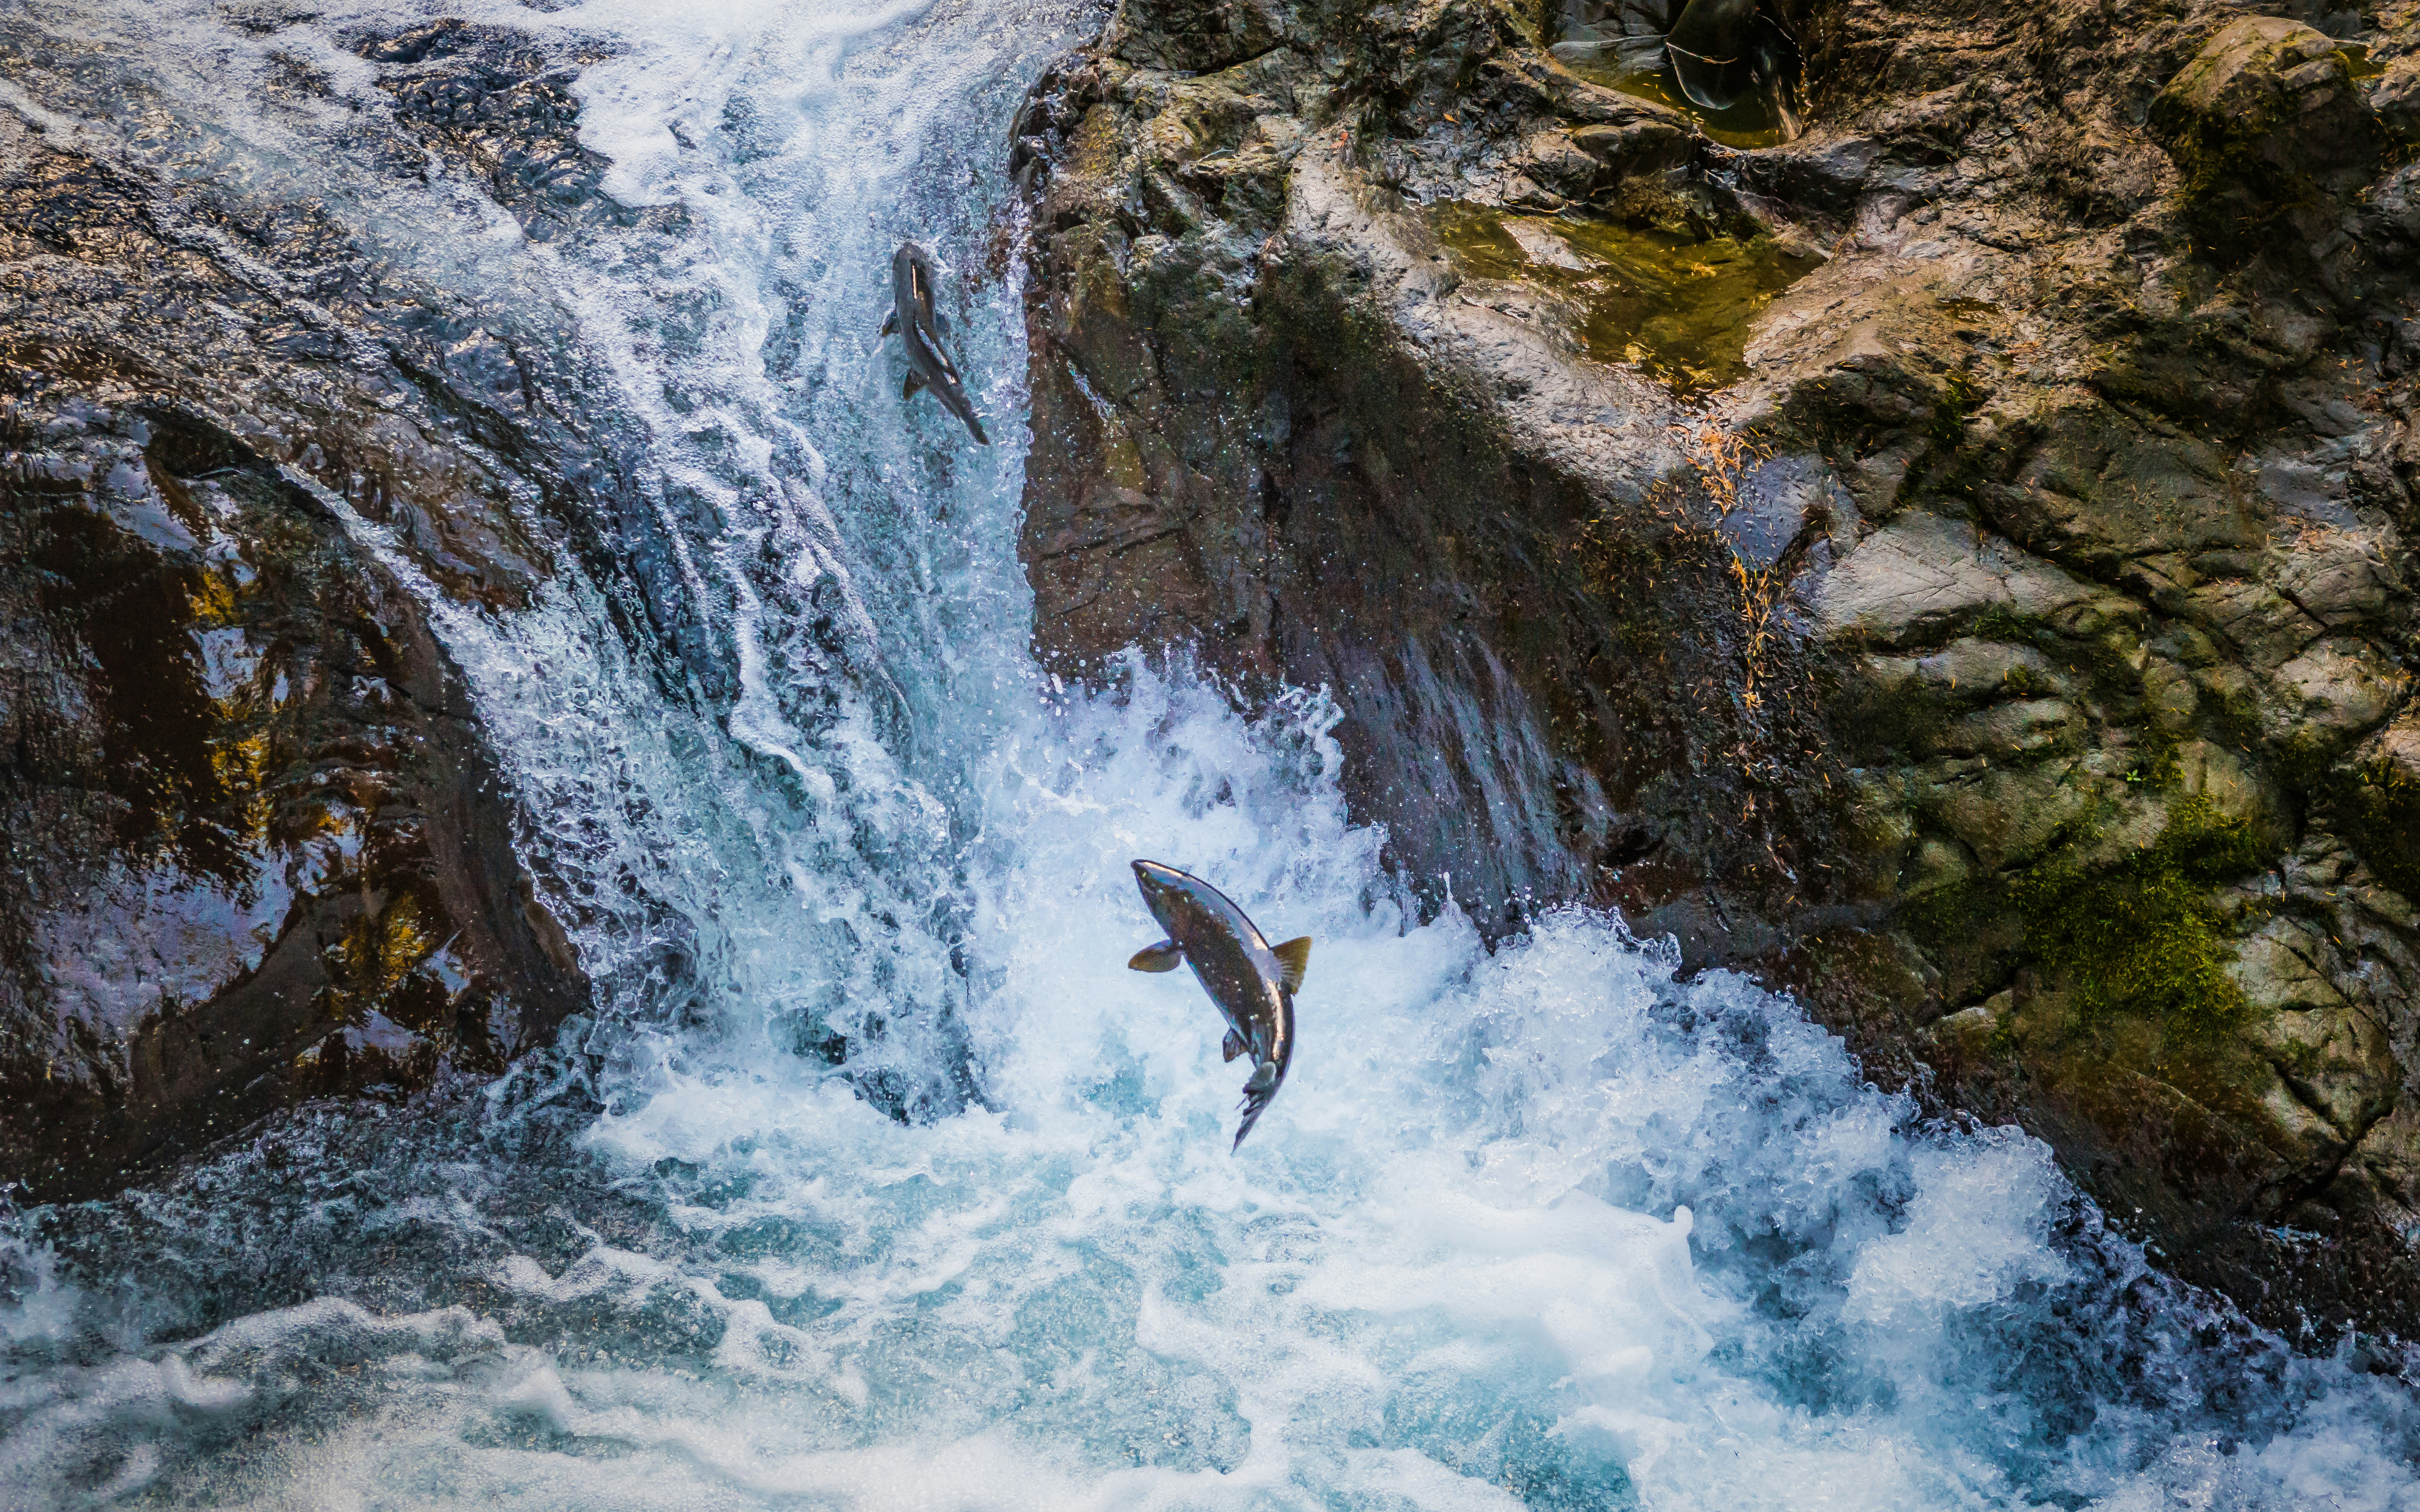 A fat, silvery Coho salmon fights its way upstream, leaping up a rocky embankment where whitewater is coursing between two large boulders